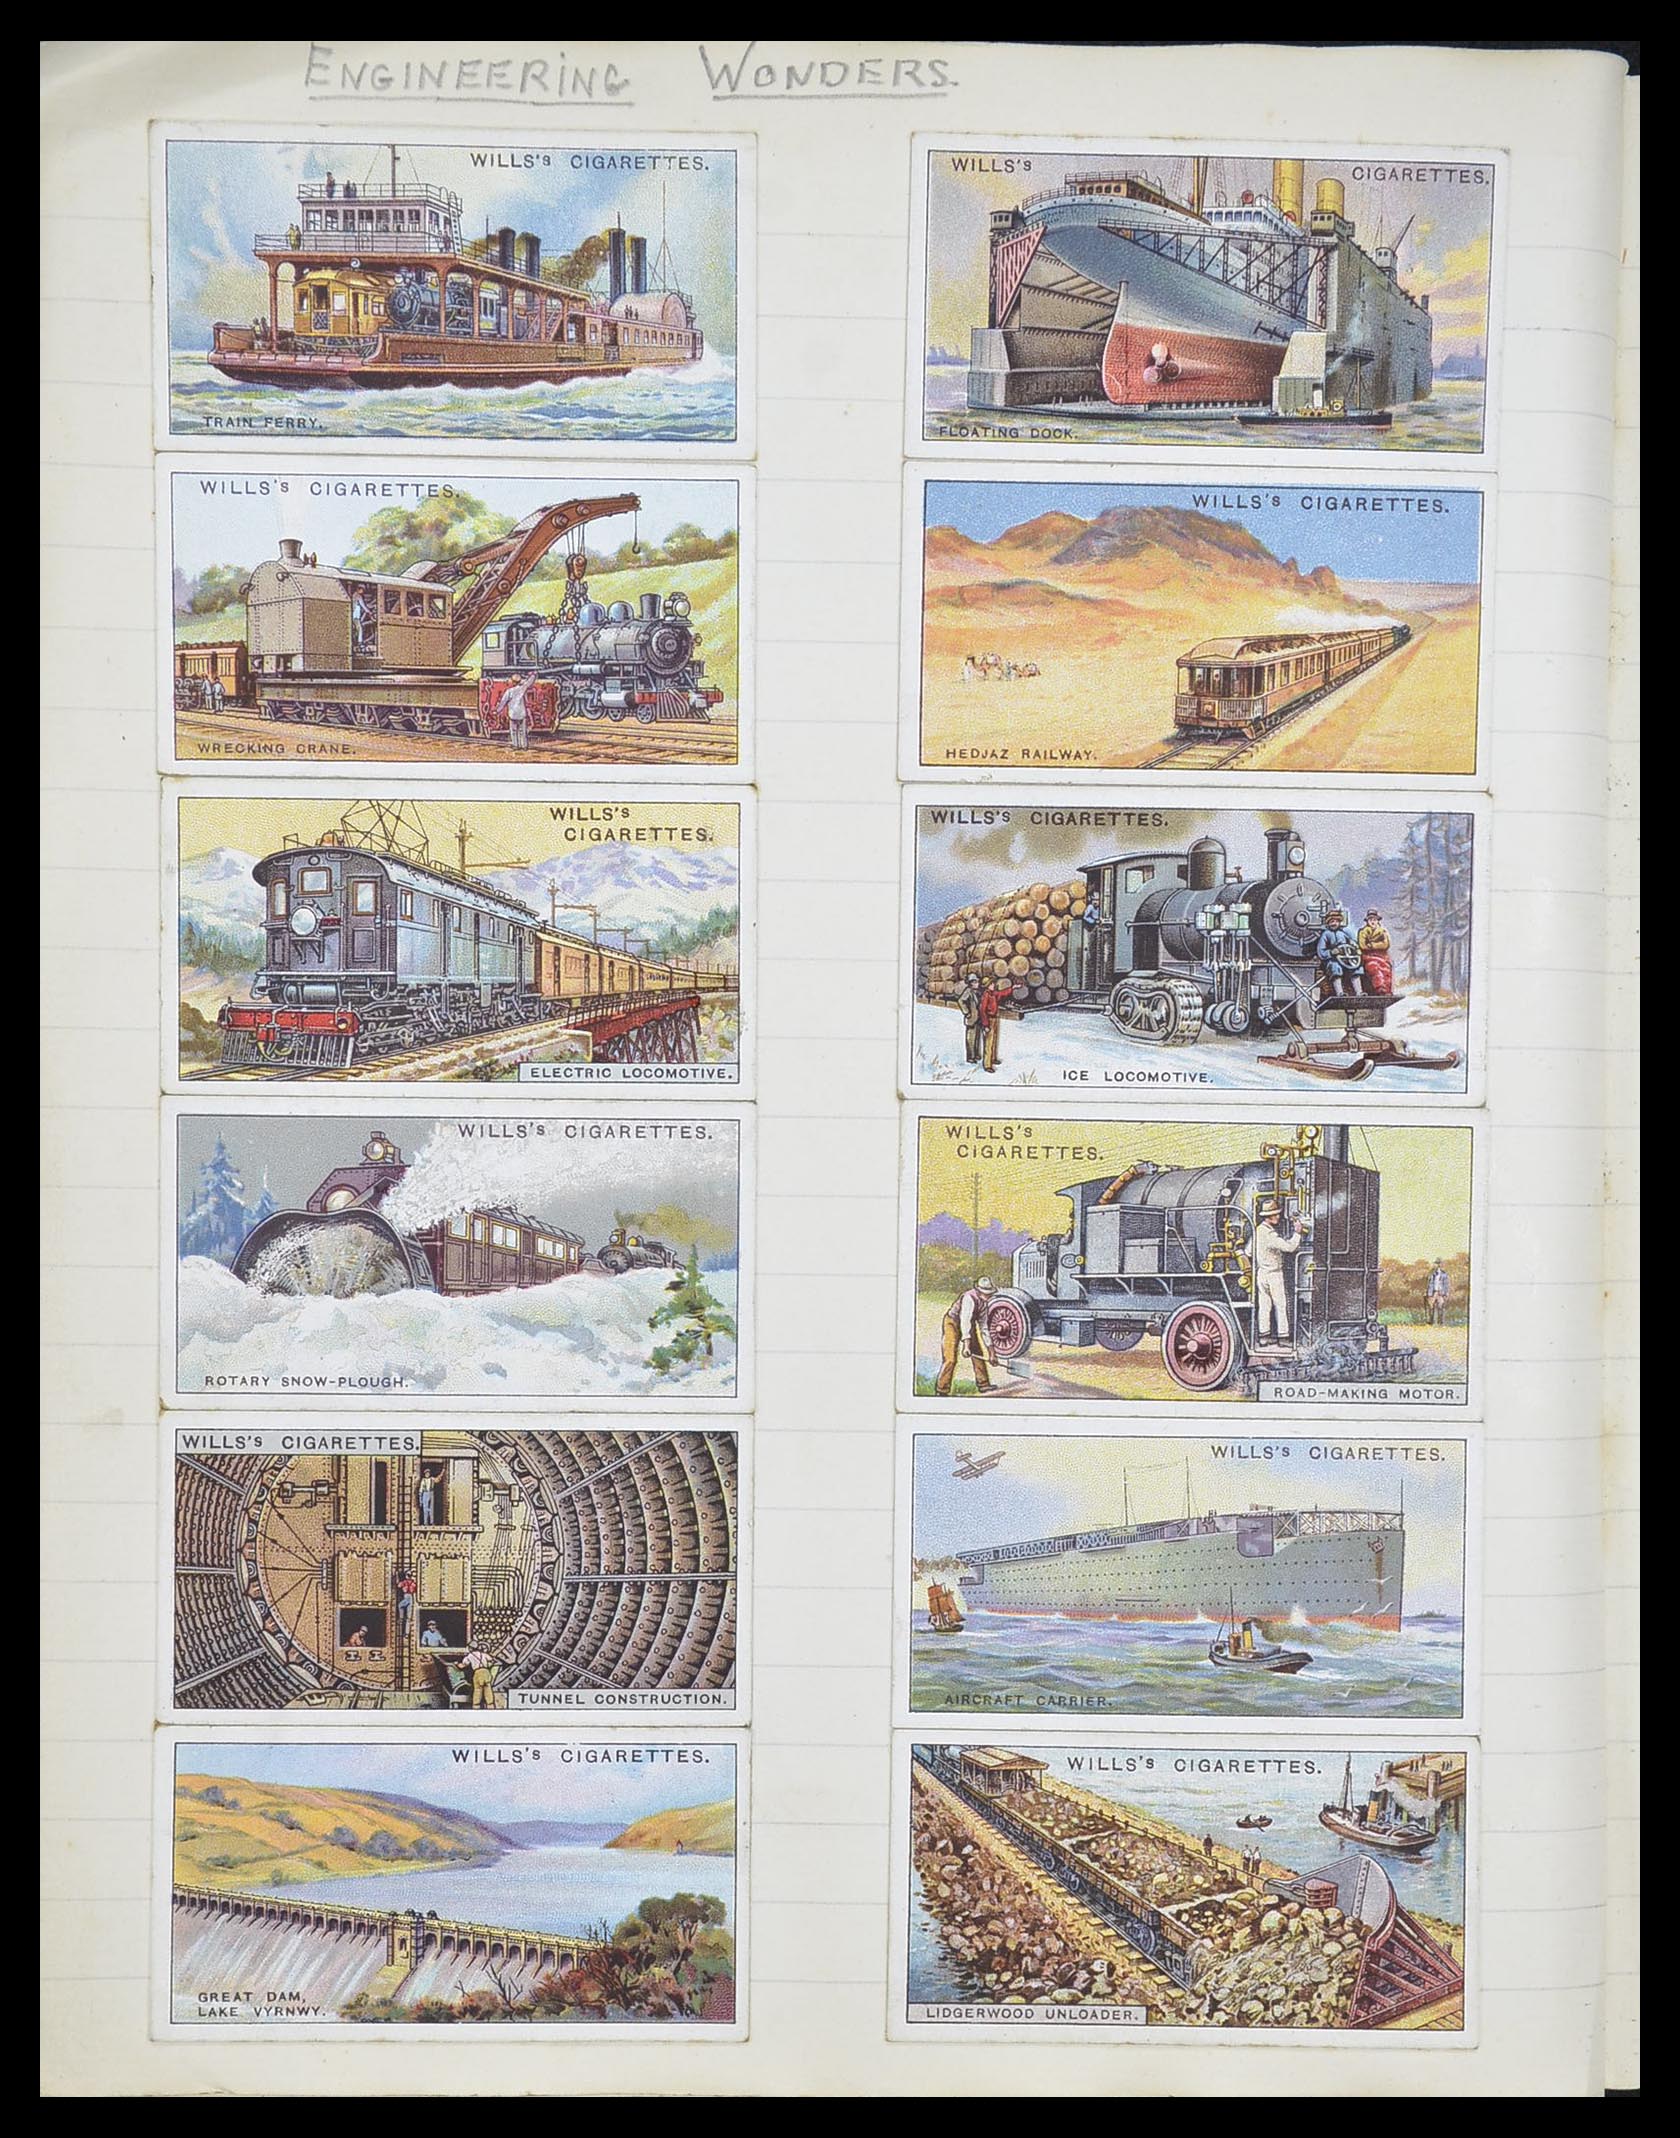 33444 096 - Stamp collection 33444 Great Britain cigarette cards.